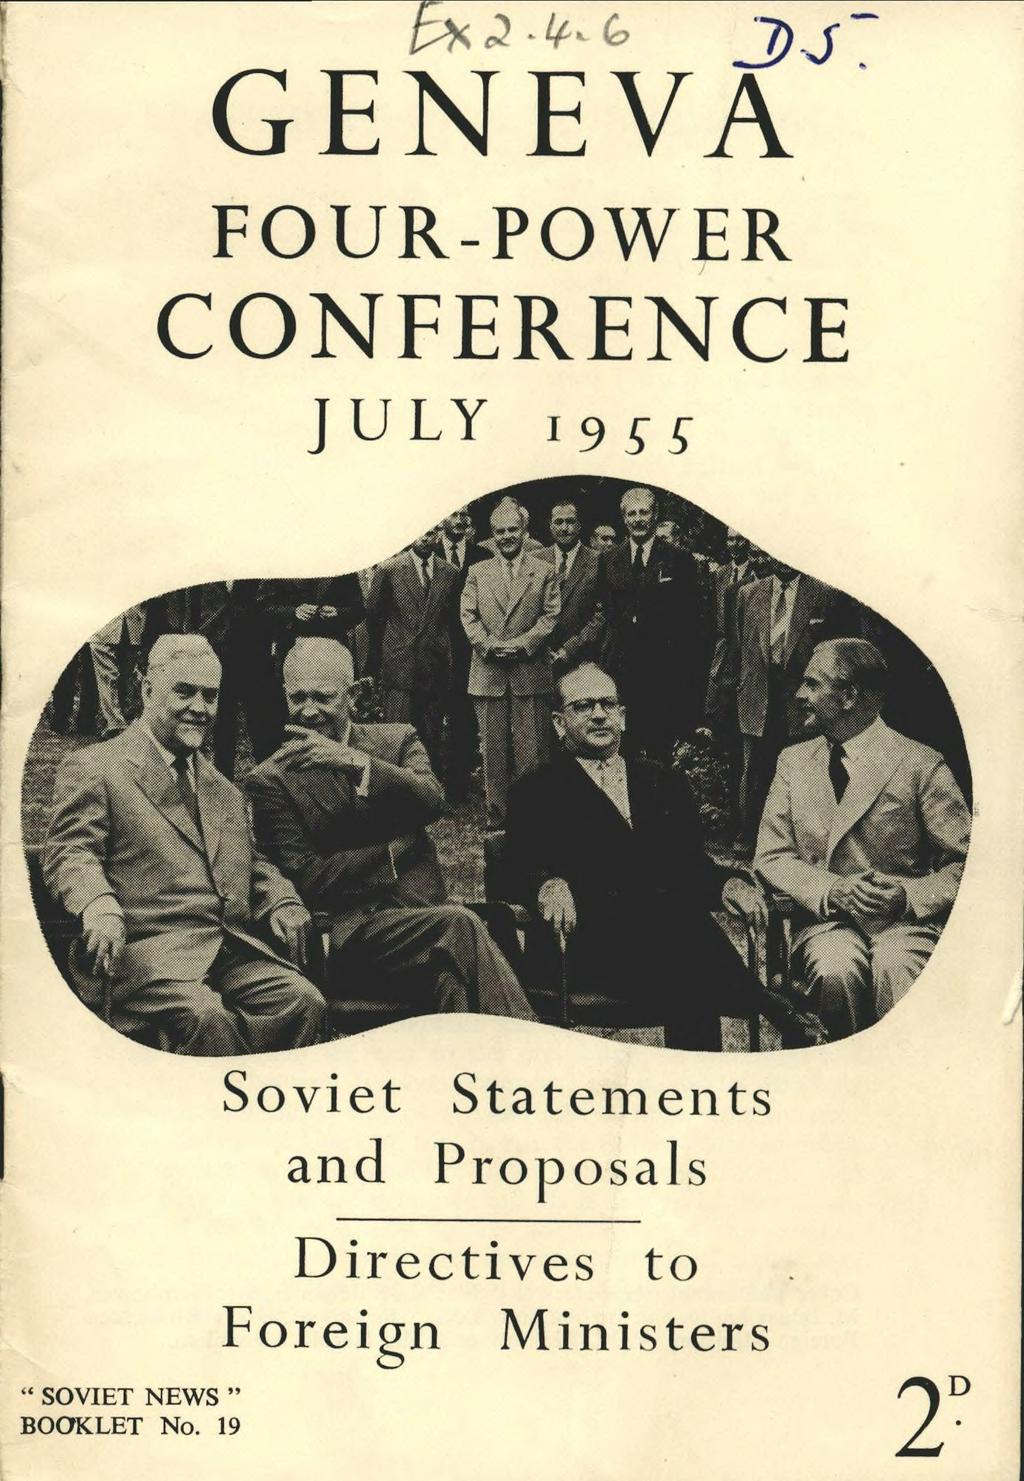 fa 2 - l)j GENEVA FOUR-POWER CONFERENCE JULY,95r SOVIET NEW S BOOKLET